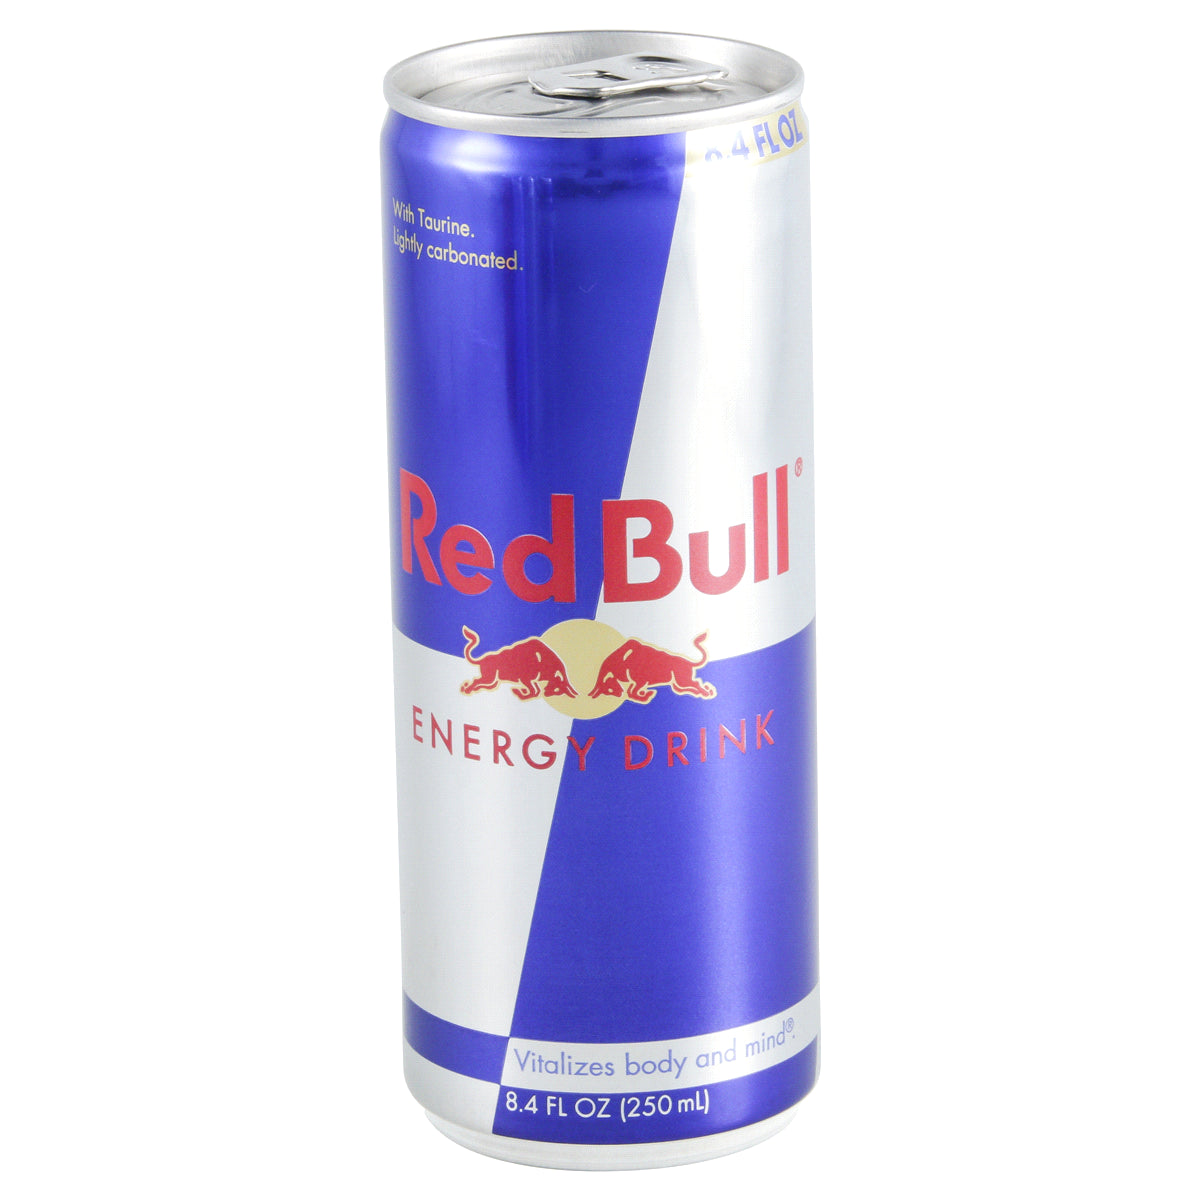 stm>Red Bull, can